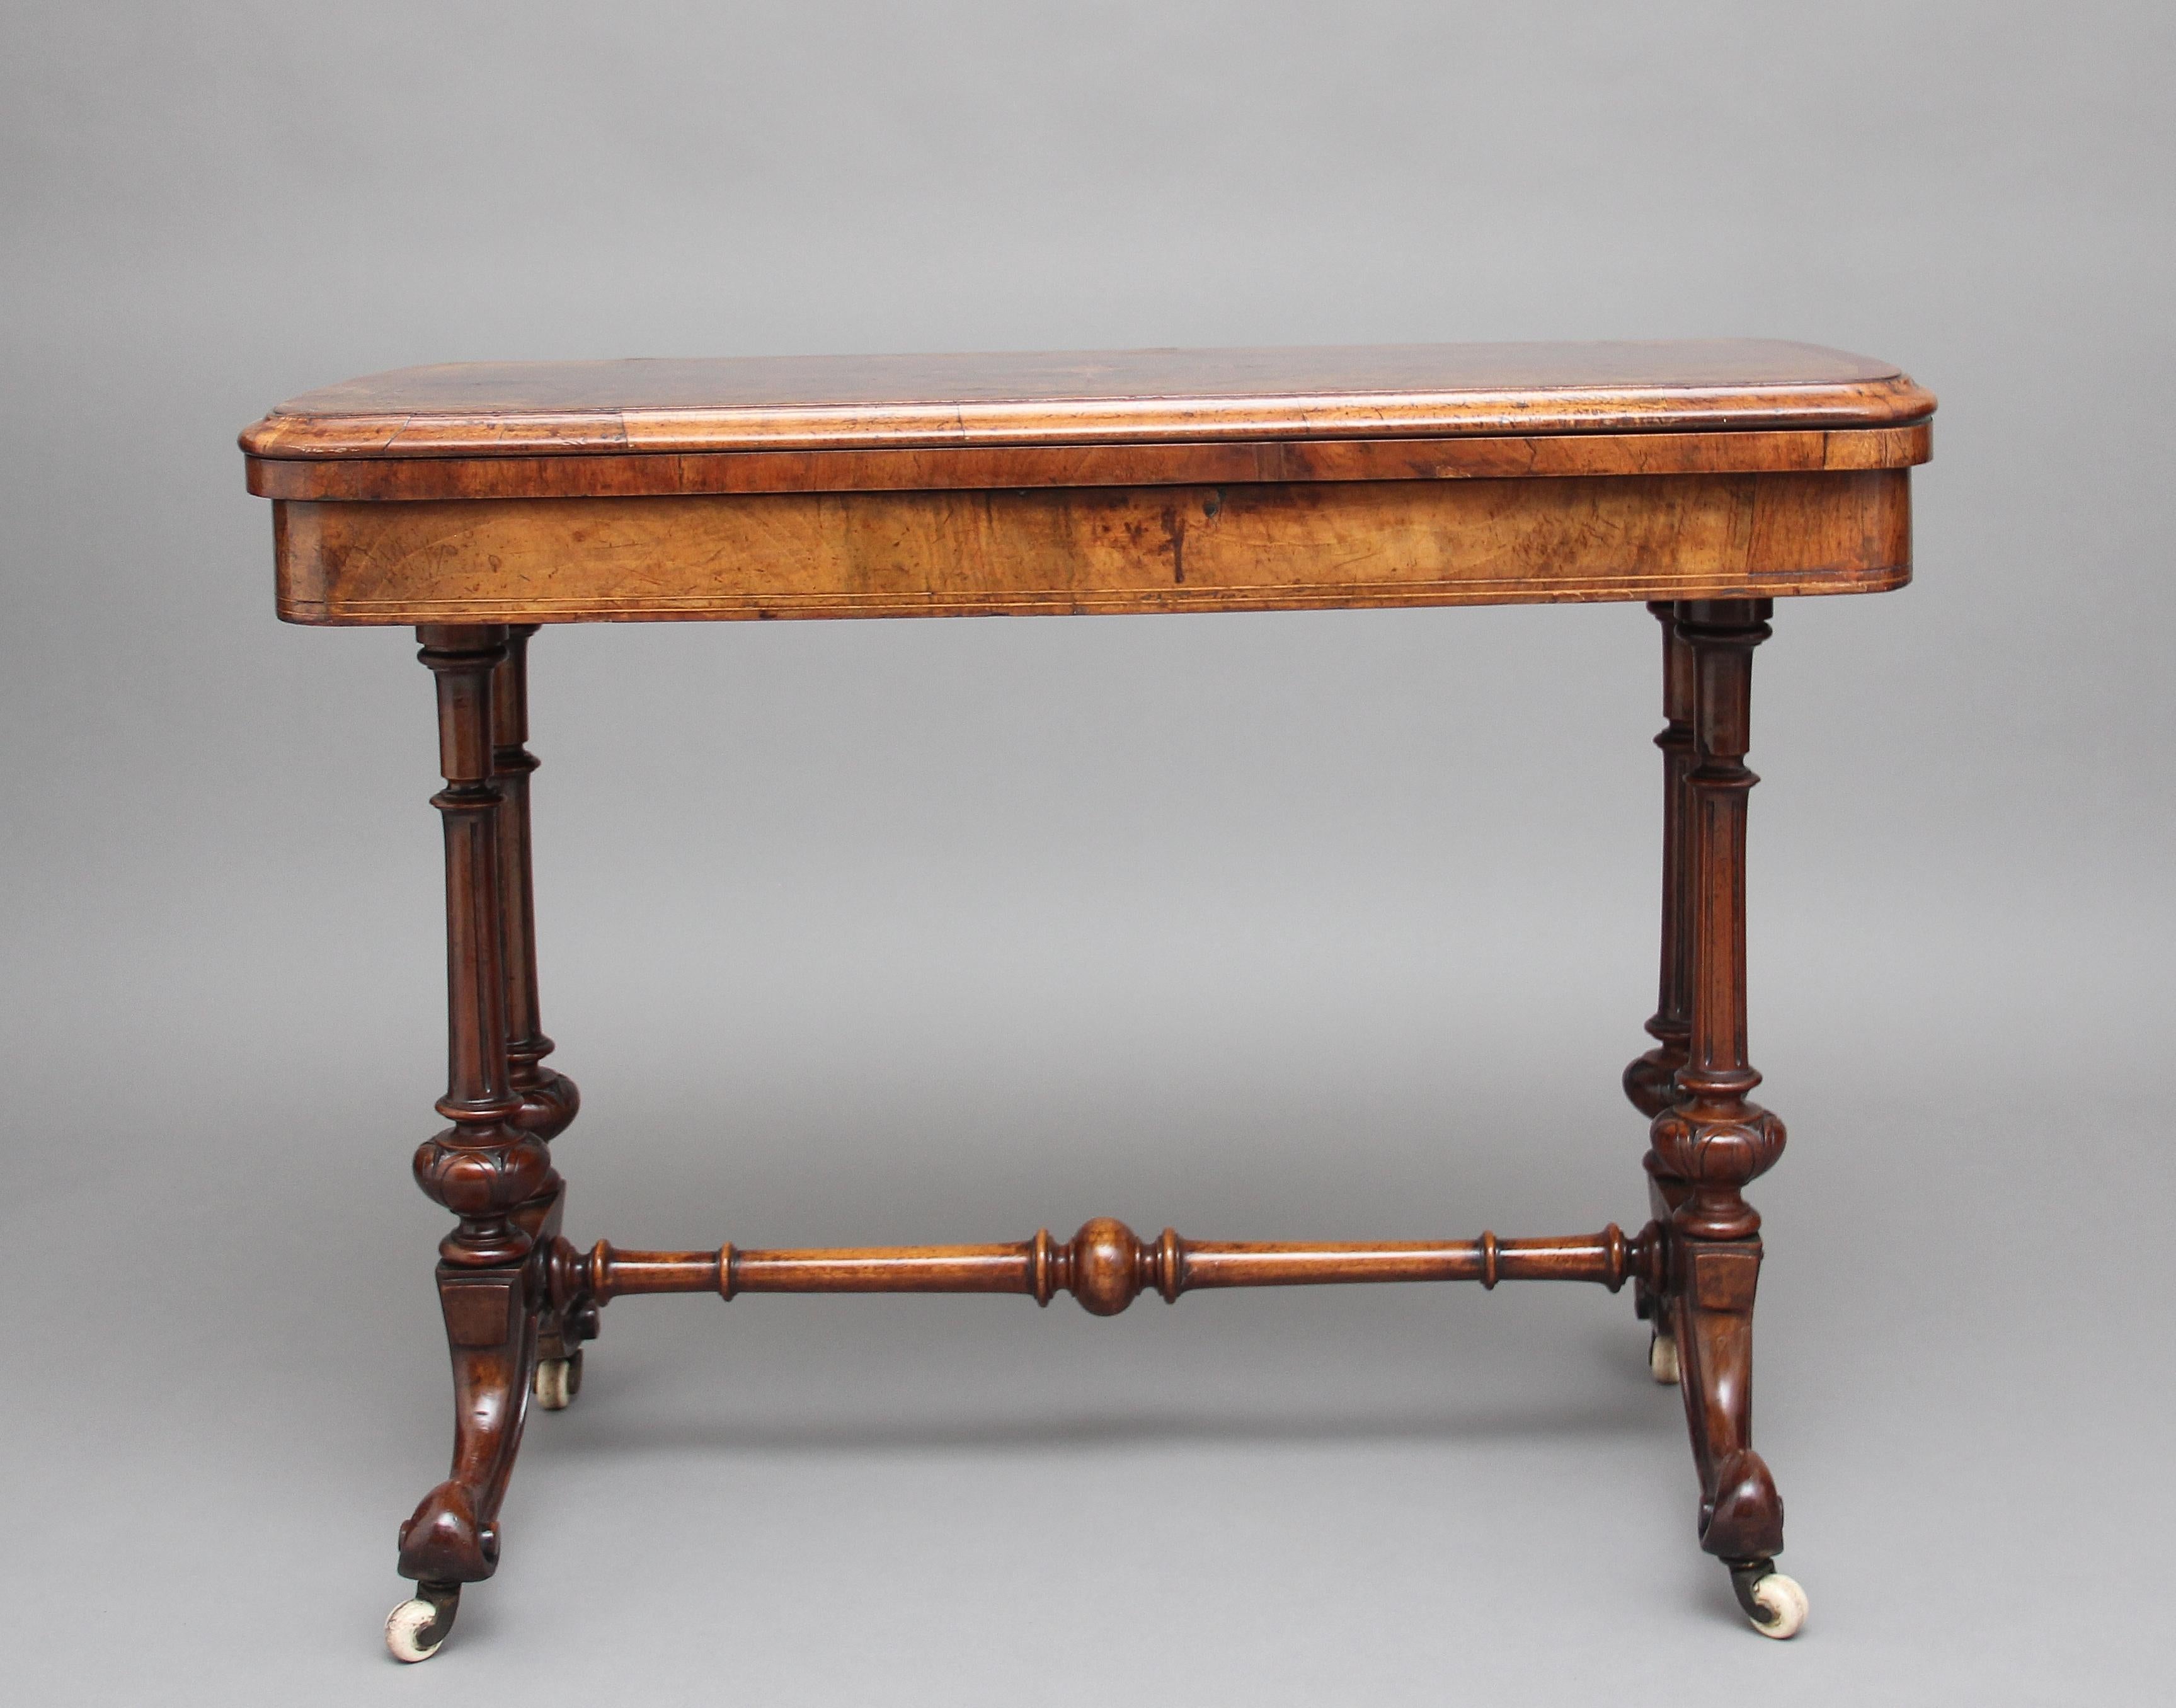 19th century burr walnut and marquetry card table, the rounded rectangular top crossbanded in amboyna, boxwood inlay, and a nice marquetry pattern at the centre, the folding top which open out to reveal a green baize lined playing surface, supported